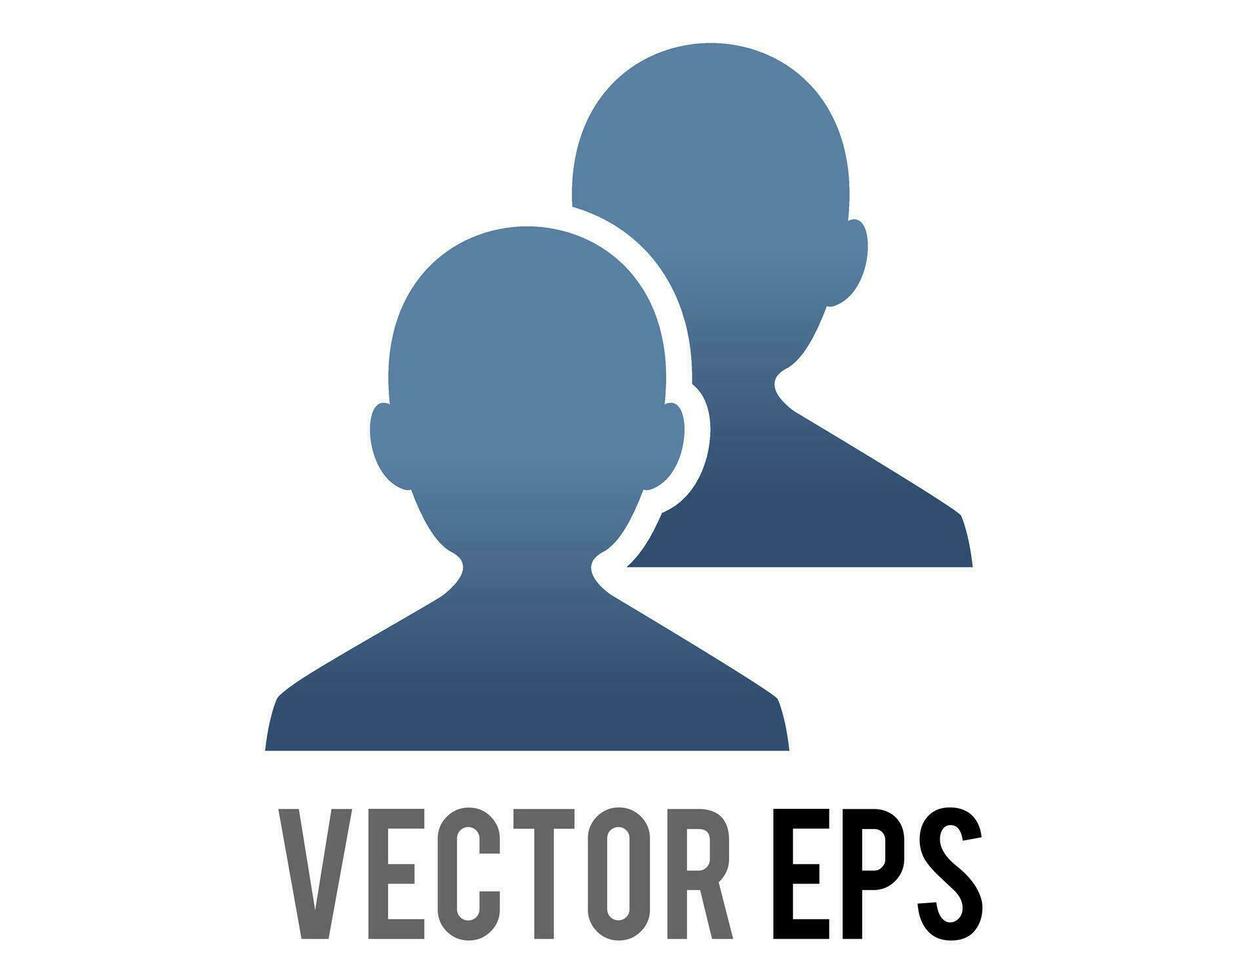 Vector dark blue silhouette heads of two people icon, represent users